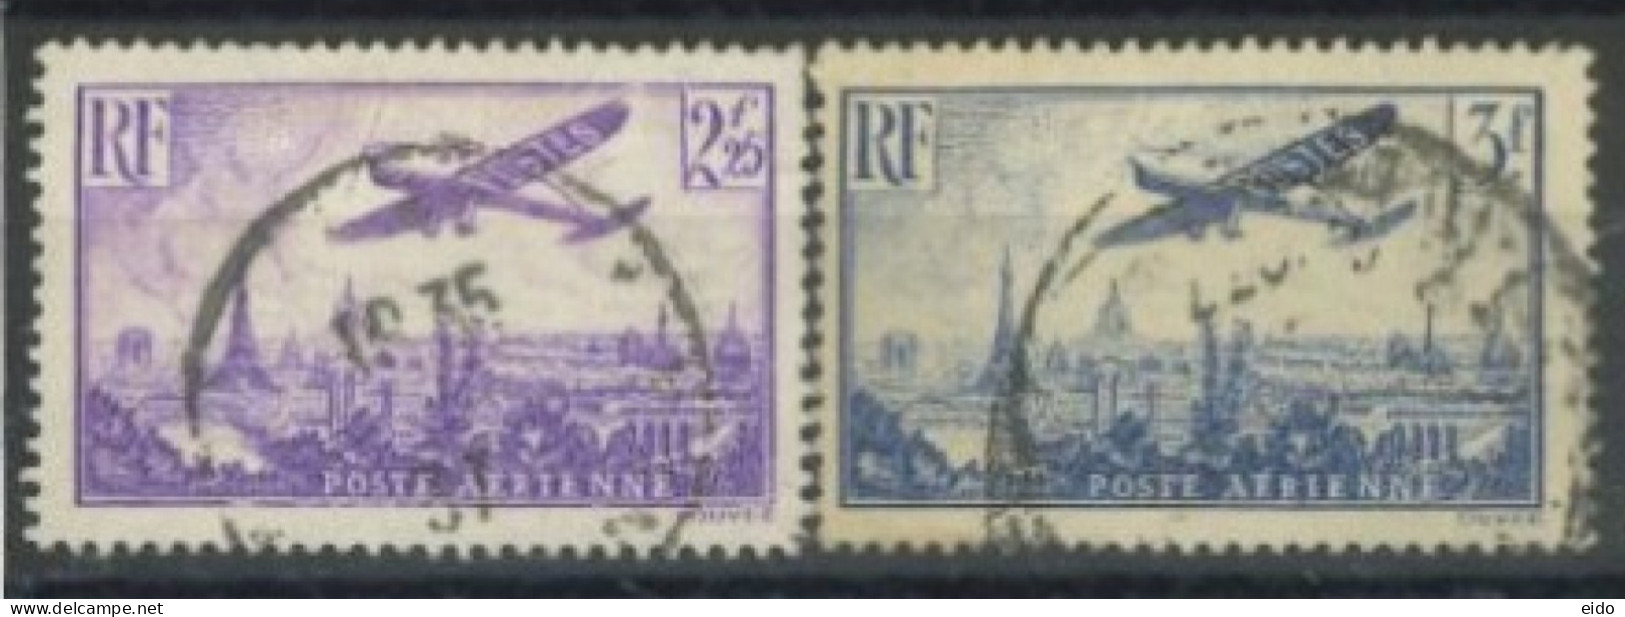 FRANCE - 1936 - PLANE FLYING OVER PARIS STAMPS SET OF 2,  # 10, &12, USED - Gebraucht